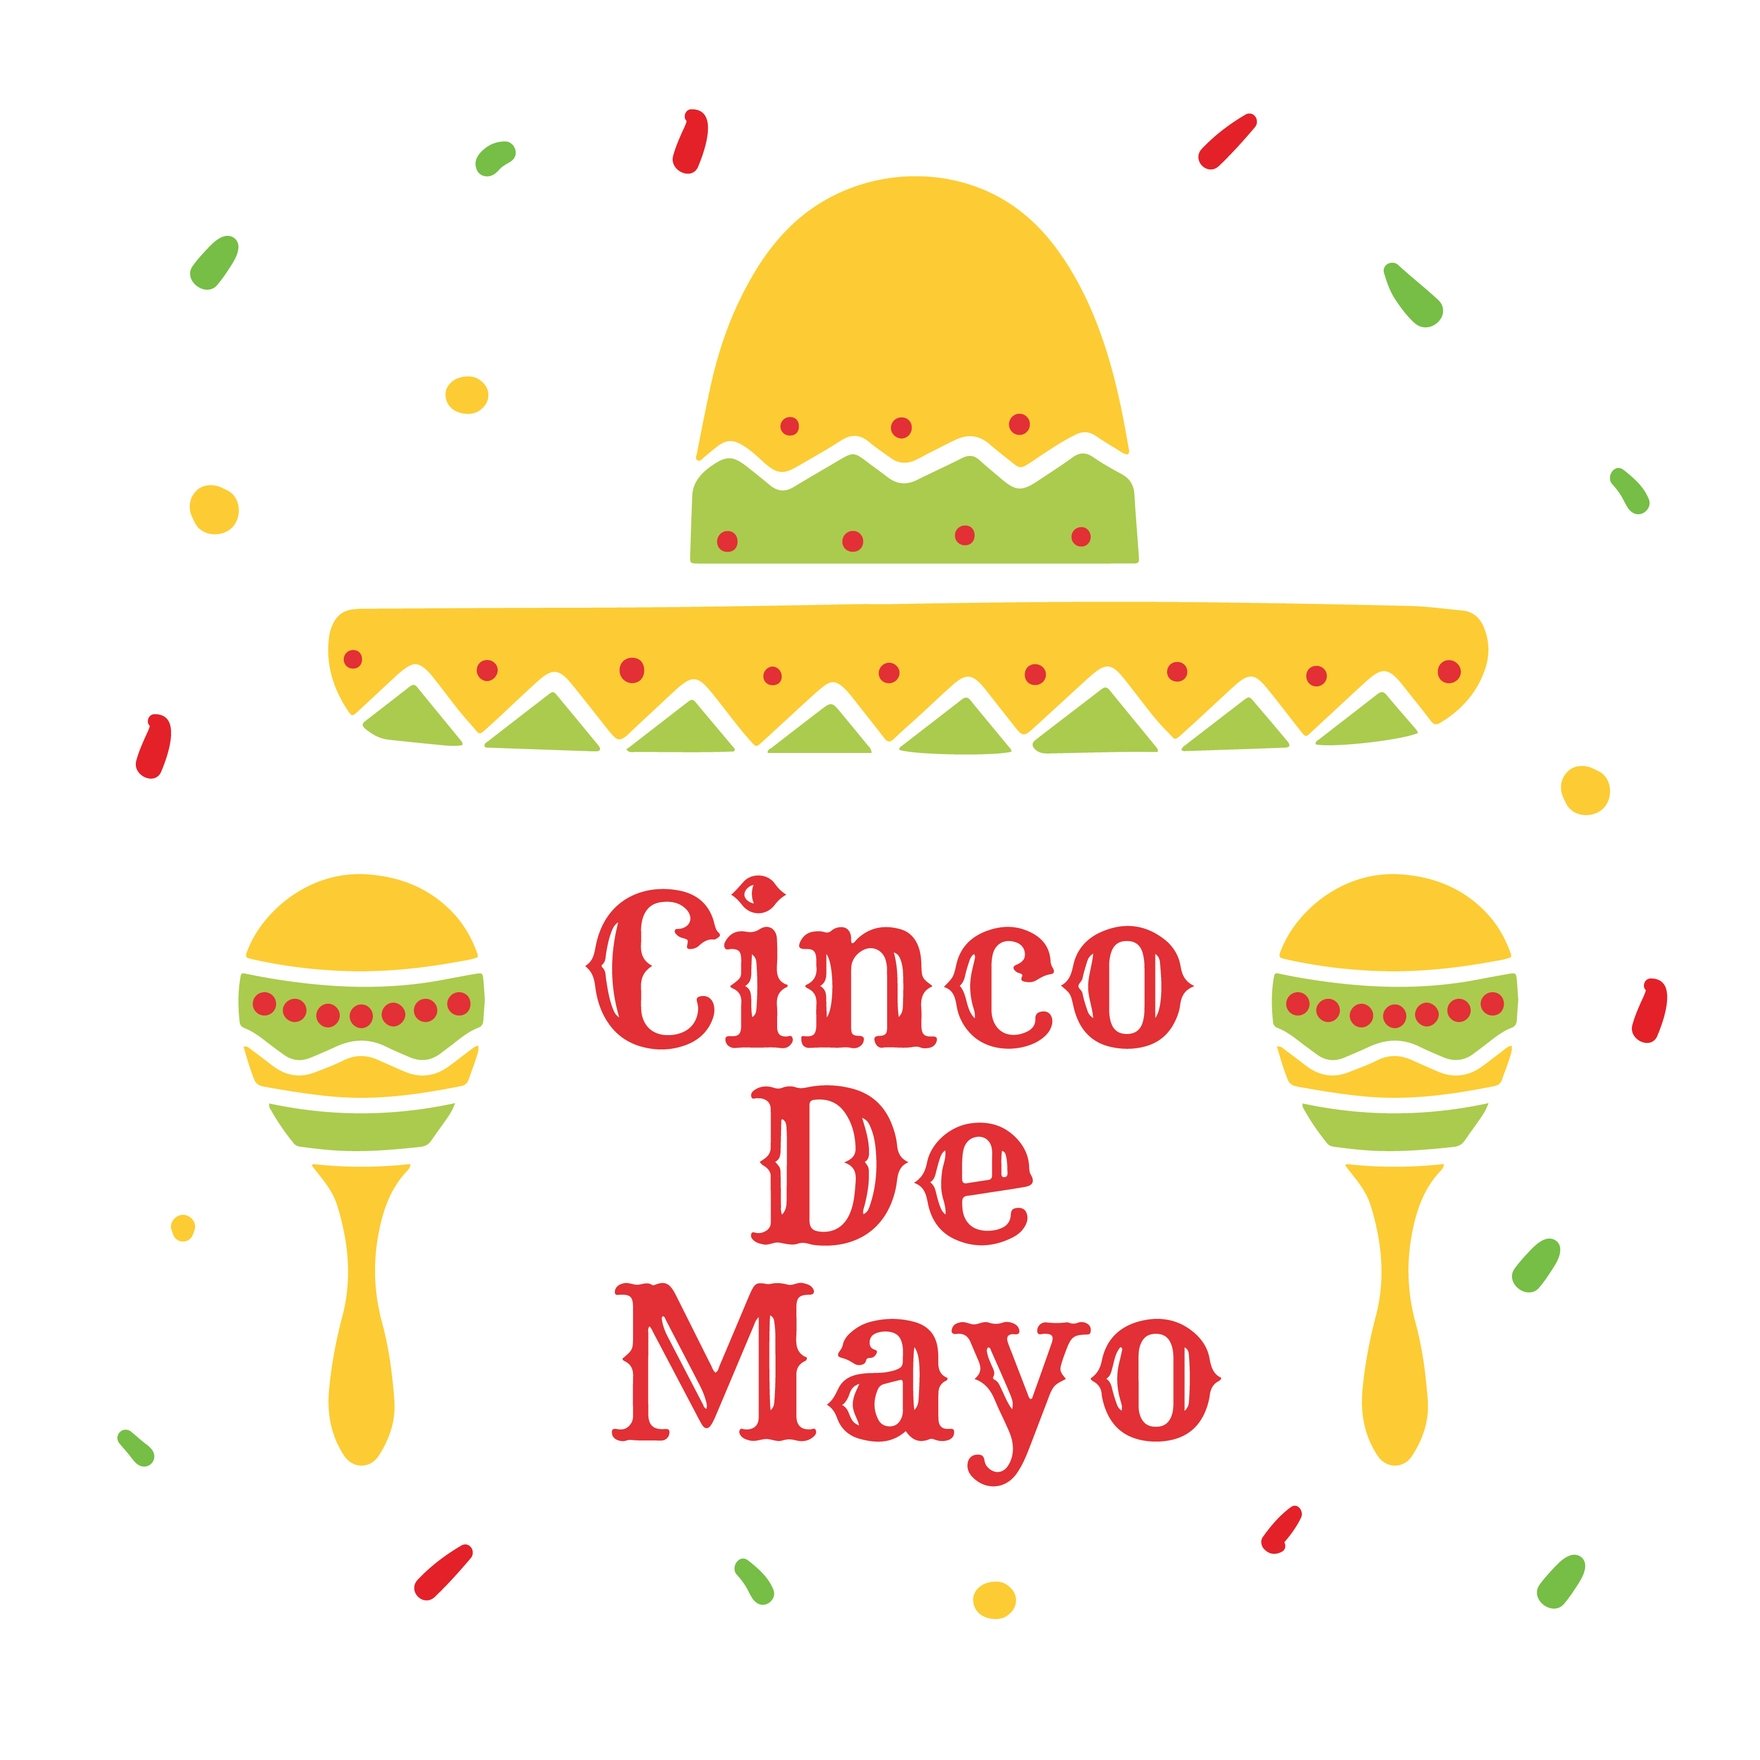 Free Cinco De Mayo Gif in Illustrator, EPS, SVG, JPG, GIF, PNG, After Effects